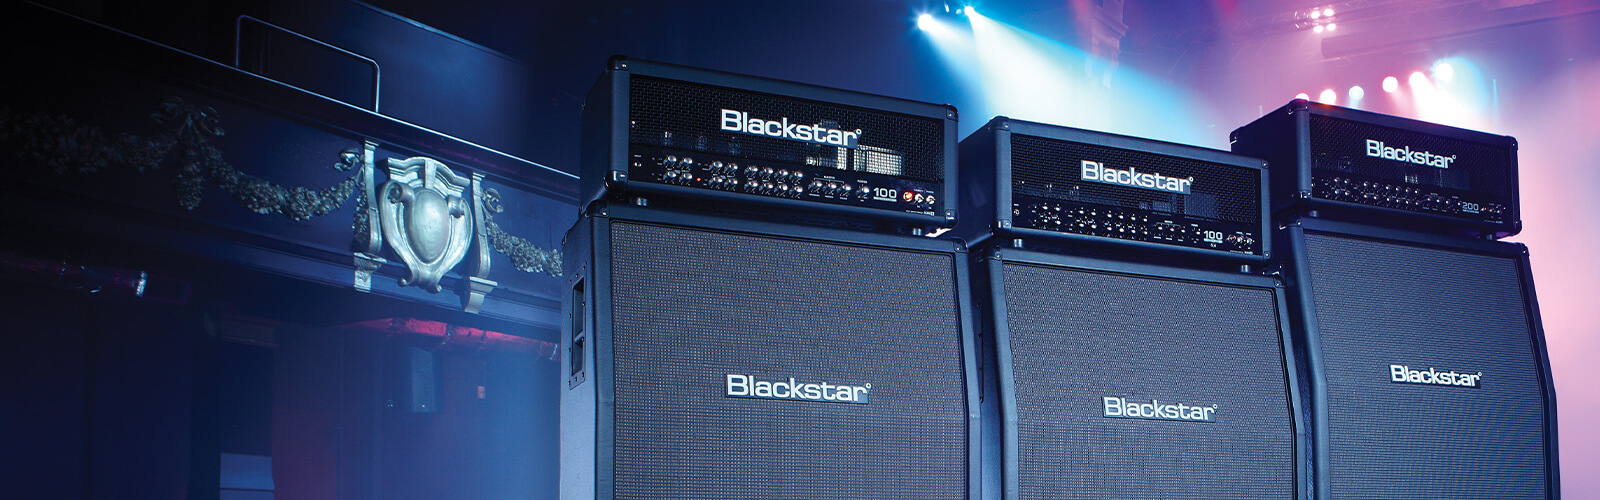 three stacks of Blackstar Series One guitar amp heads and cabs on stage with mult-colored lights behind them